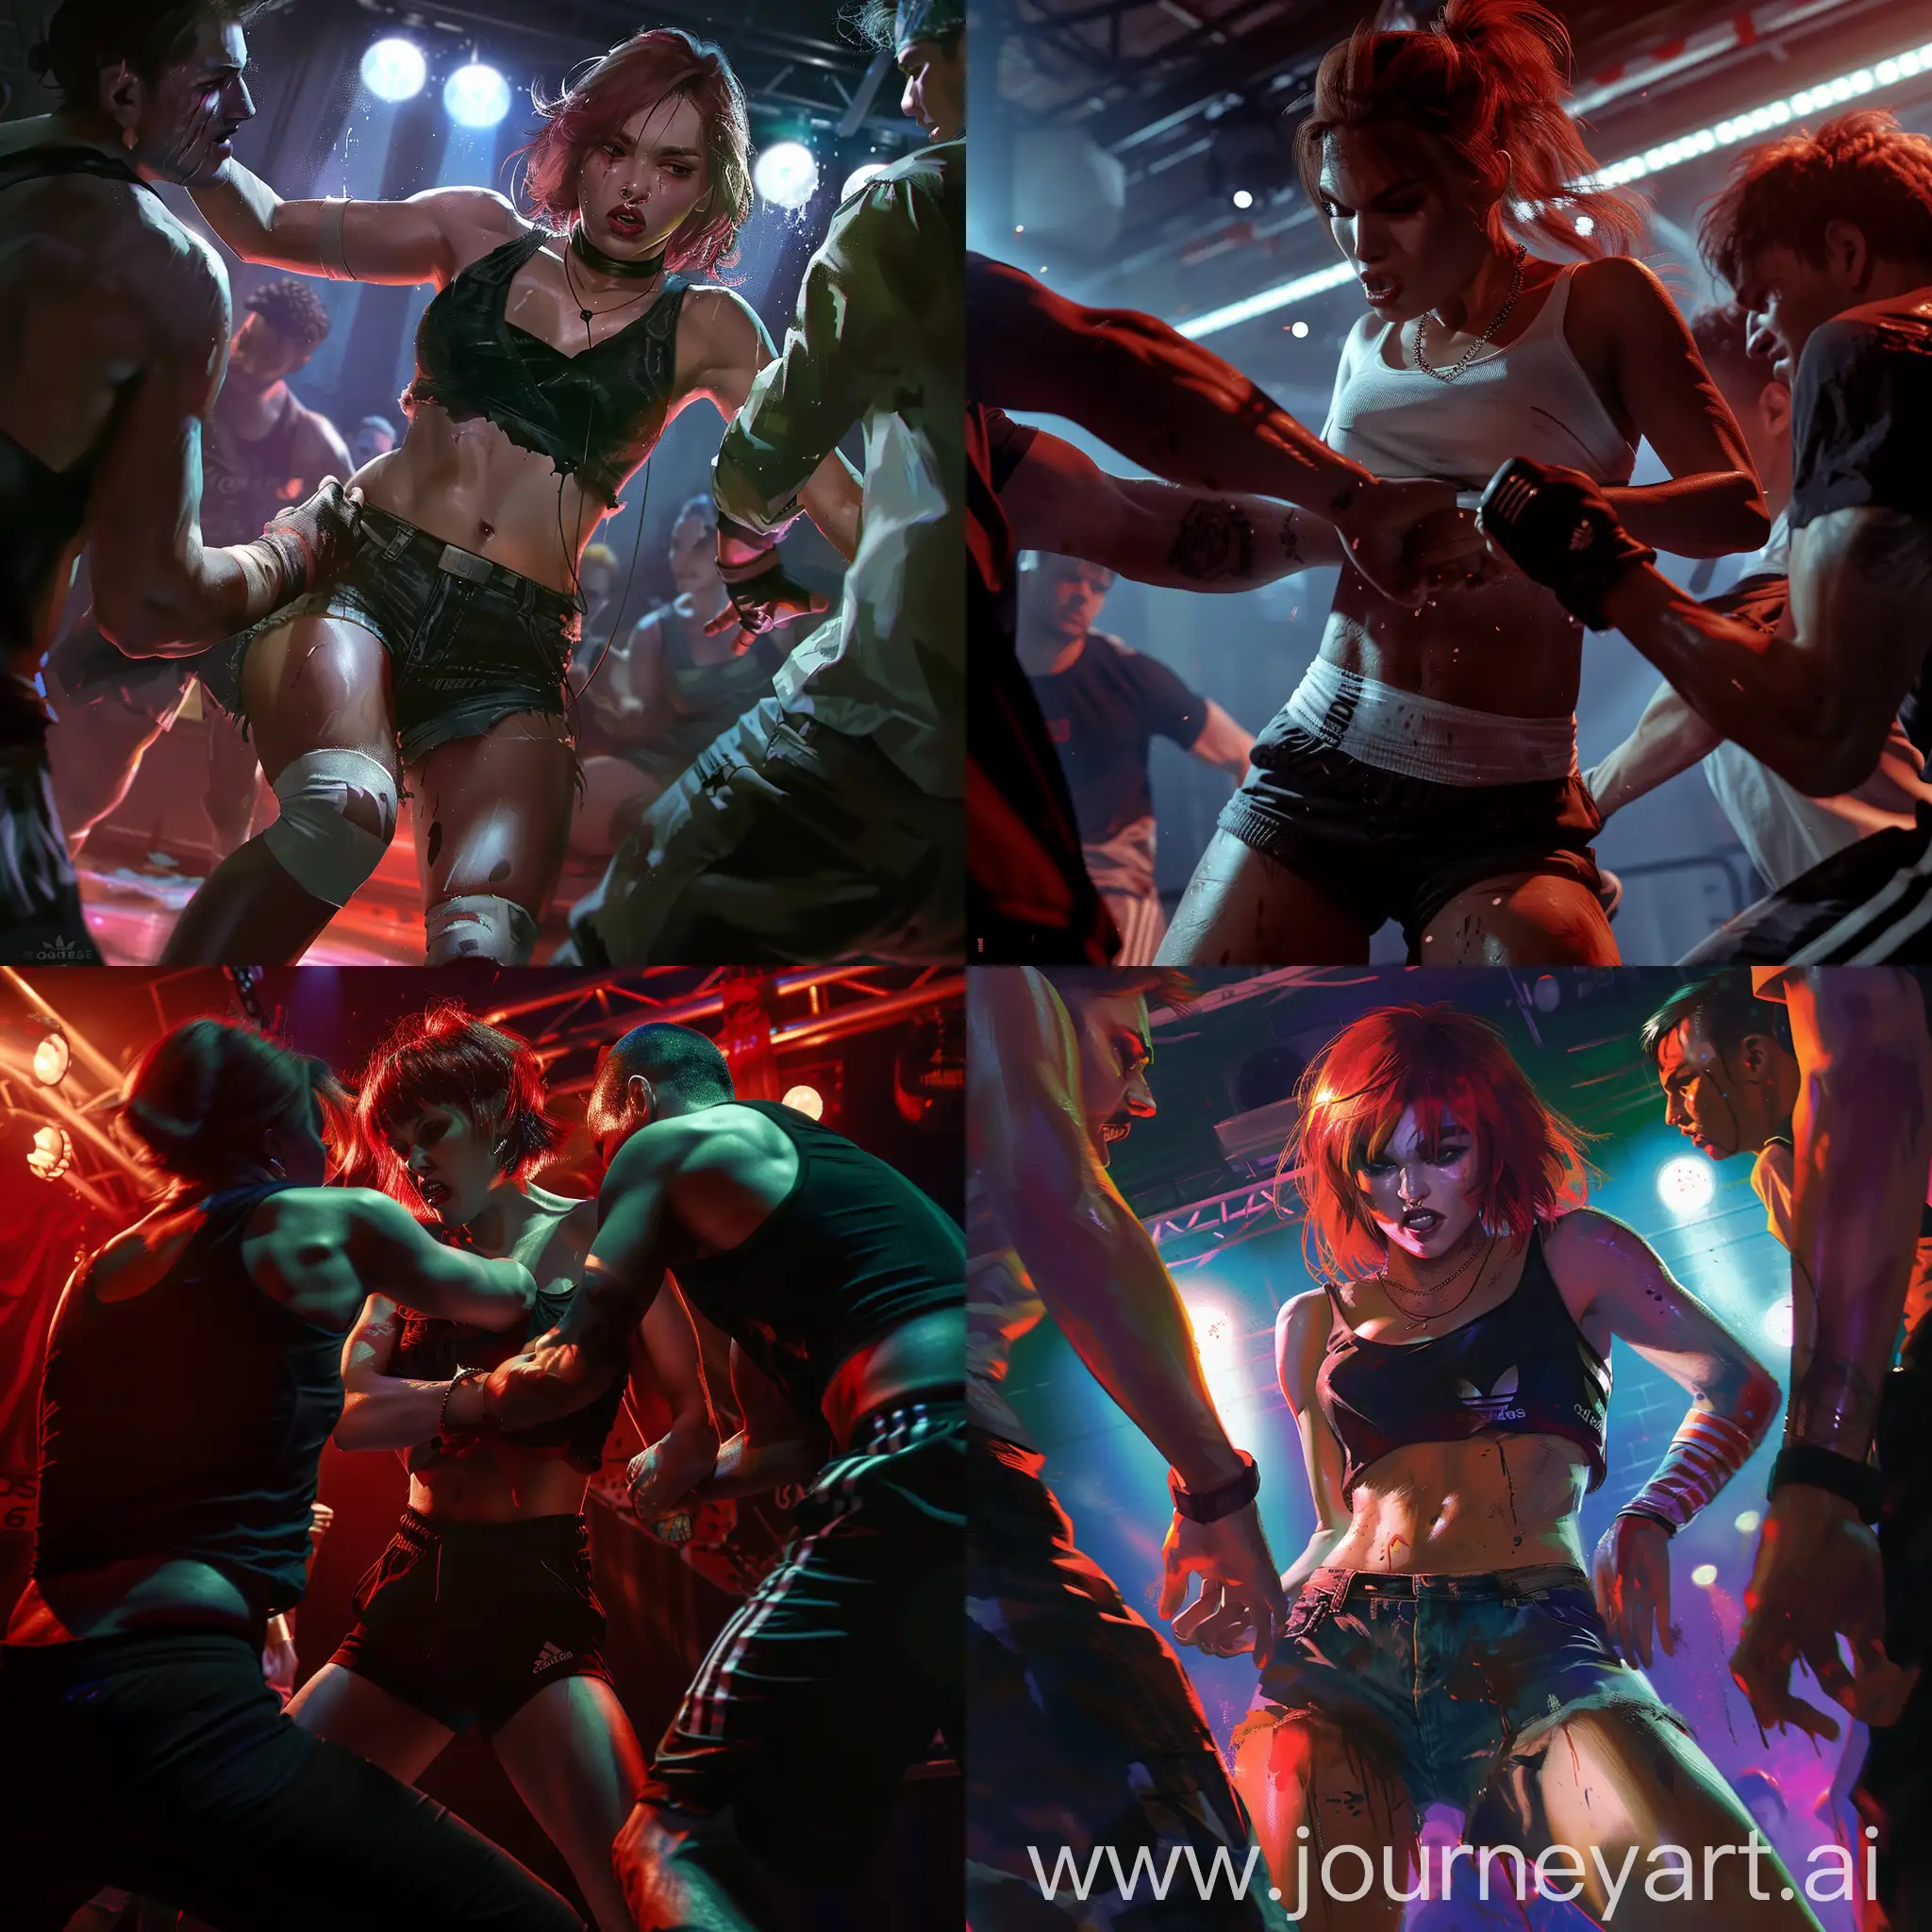 Night-Club-Bouncer-Fights-Off-Two-Attackers-in-Dramatic-Realistic-Scene